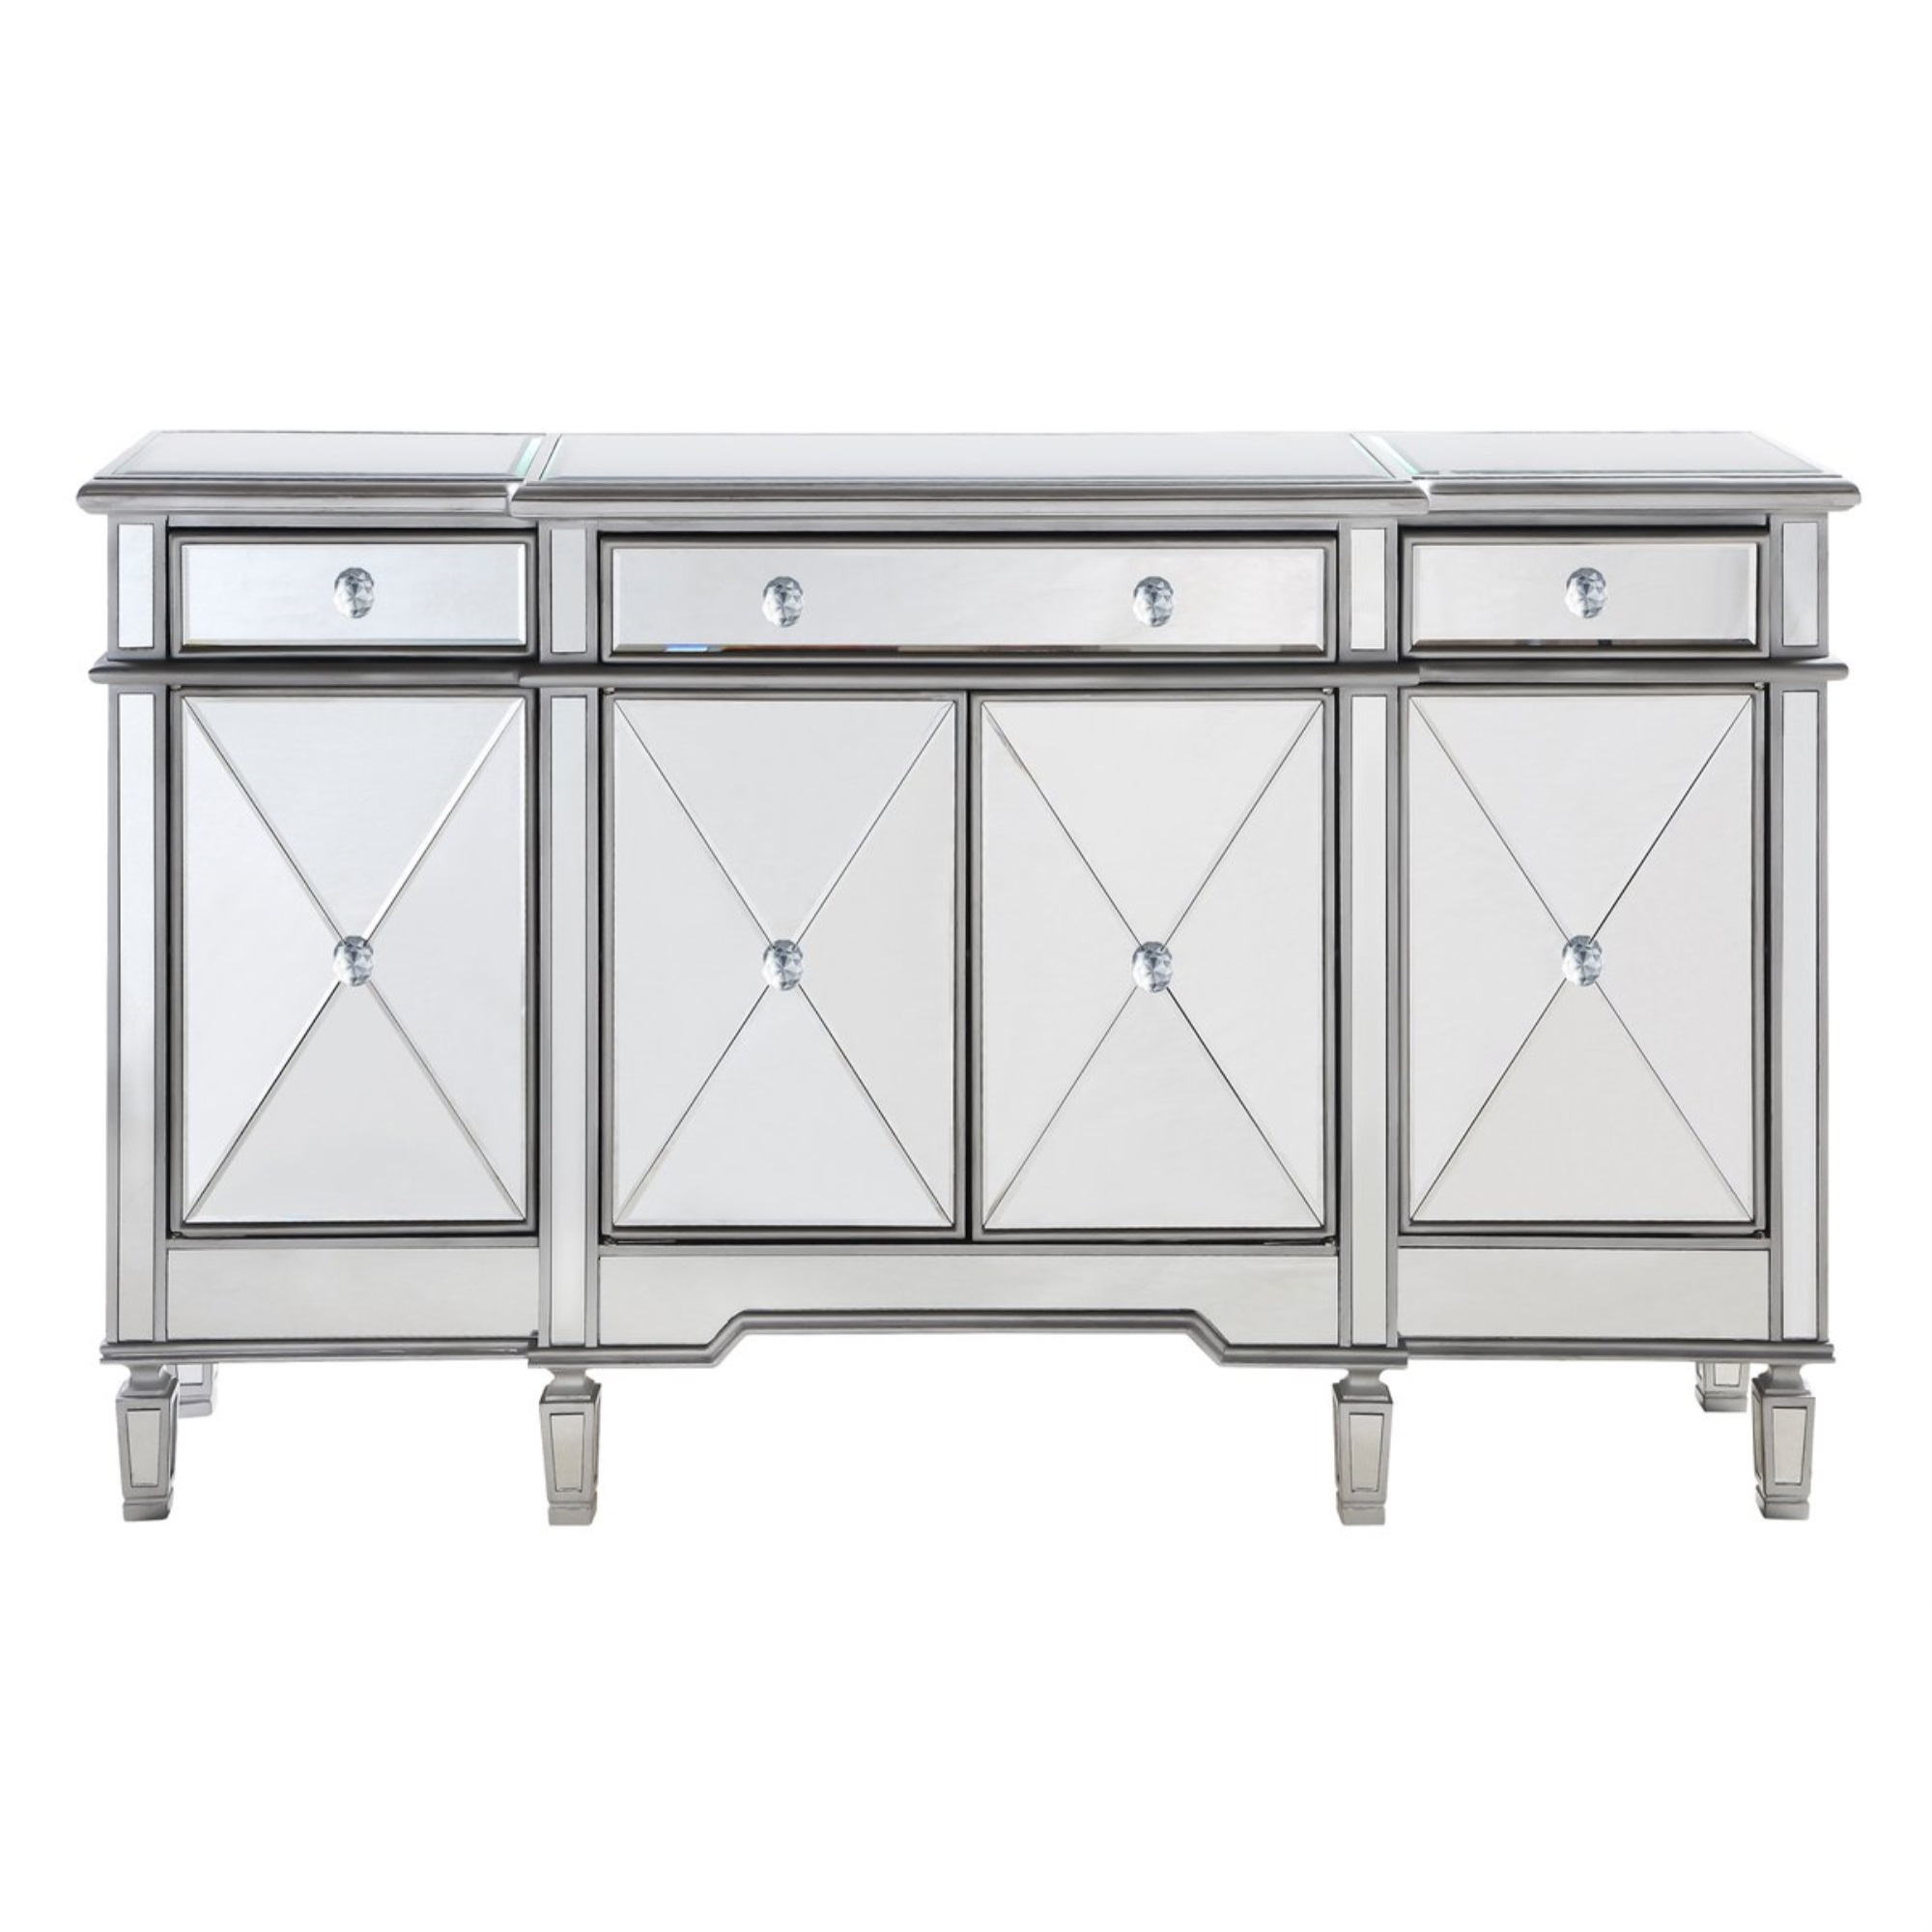 3 Drawer 4 Door Cabinet L60"W14"H36" Silver Clear - image 1 of 10